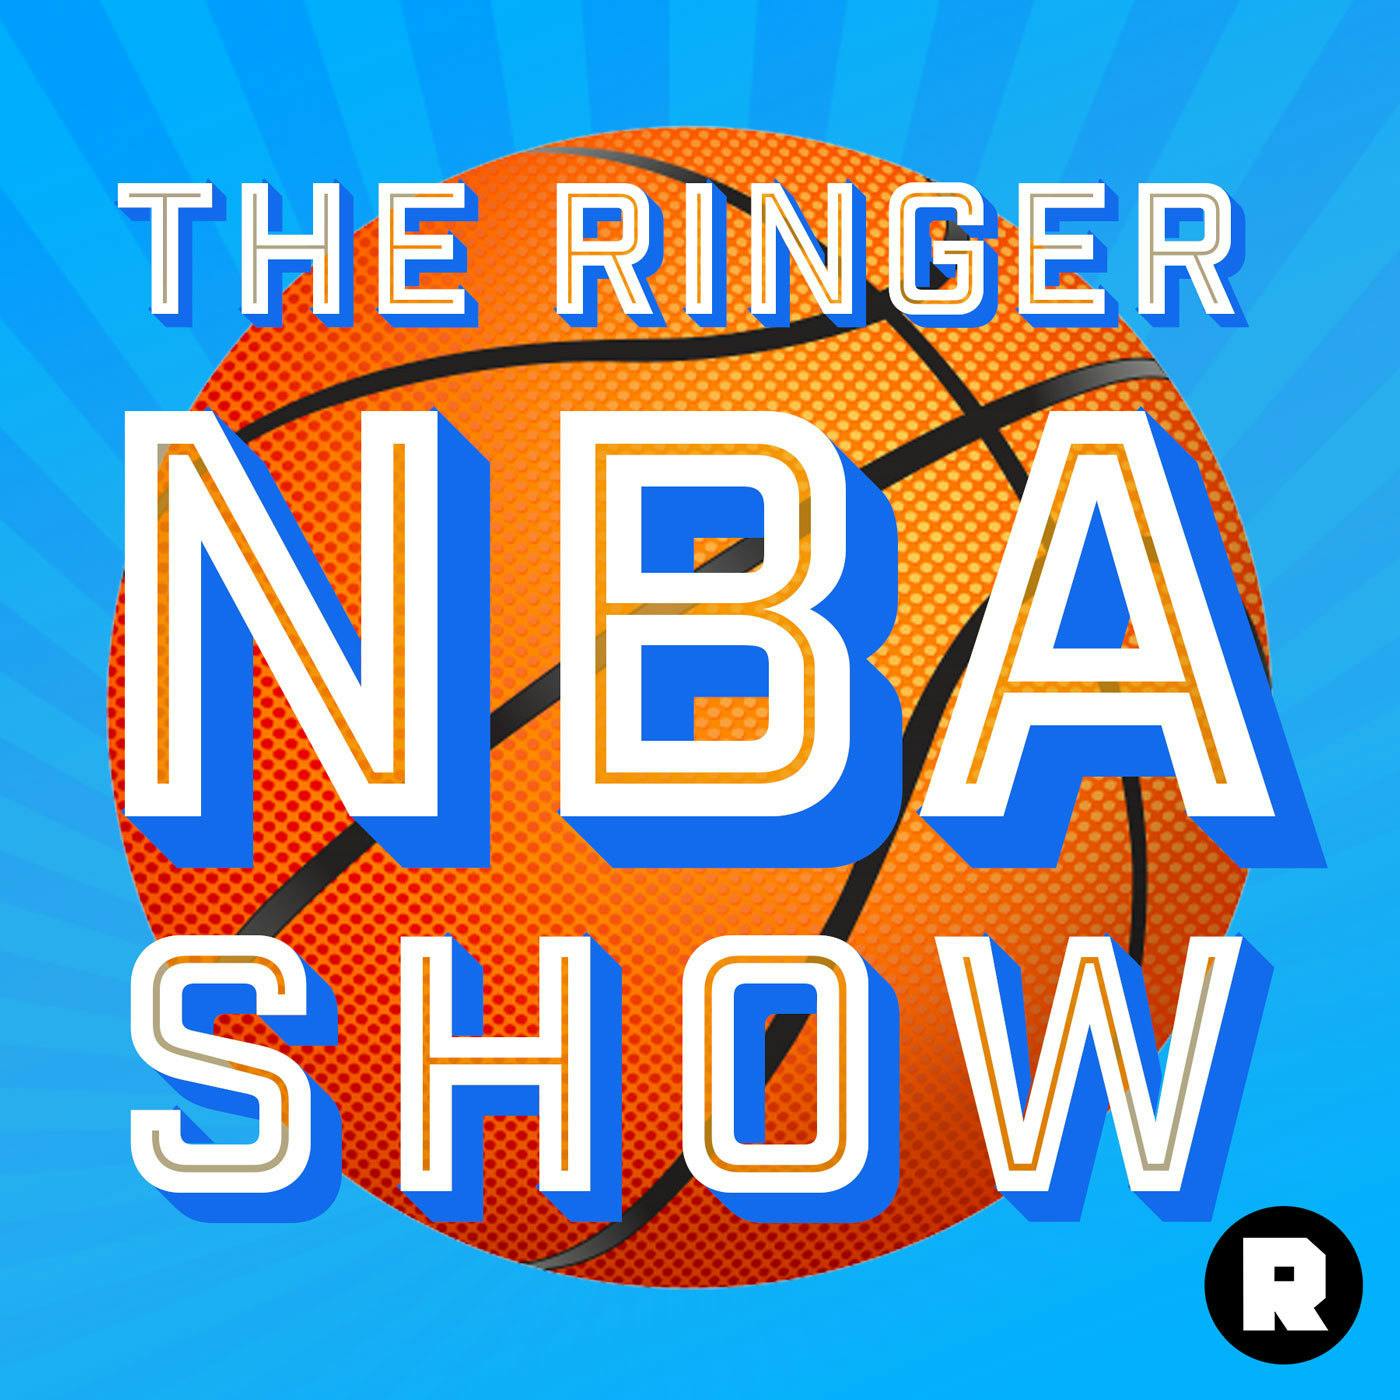 Do the Lakers Have Too Many Personalities? Plus, Other Mailbag Questions | The Ringer NBA Show (Ep. 306)